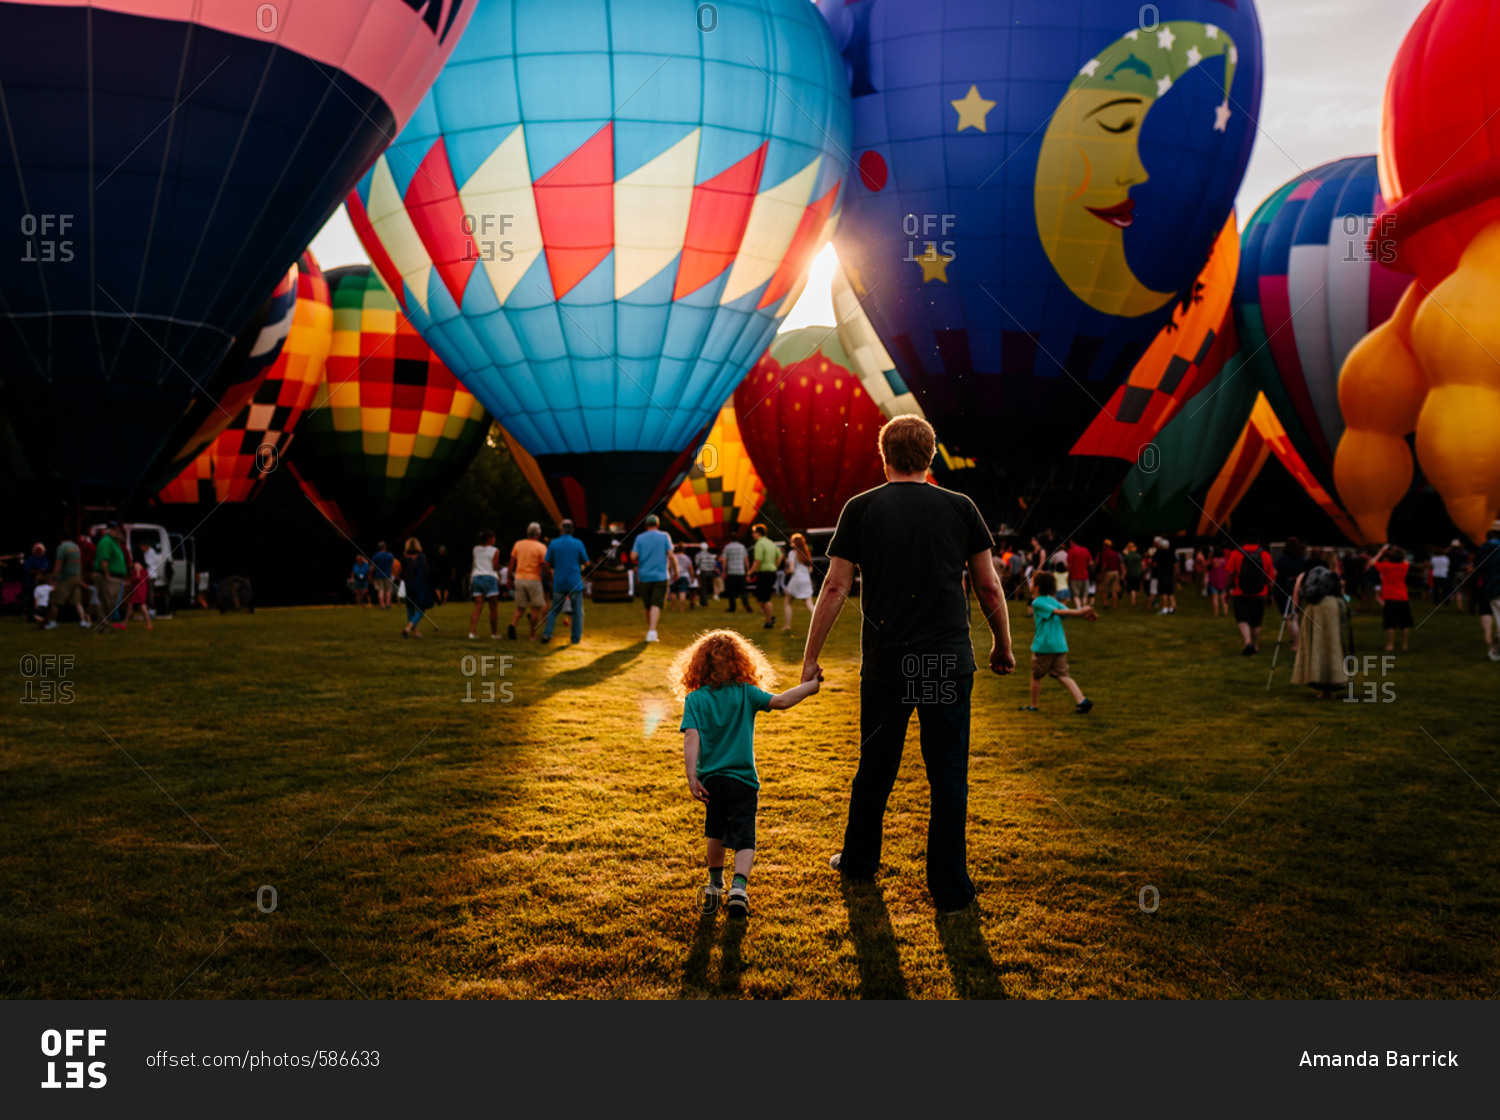 Father and son walking towards hot air balloons with crowd